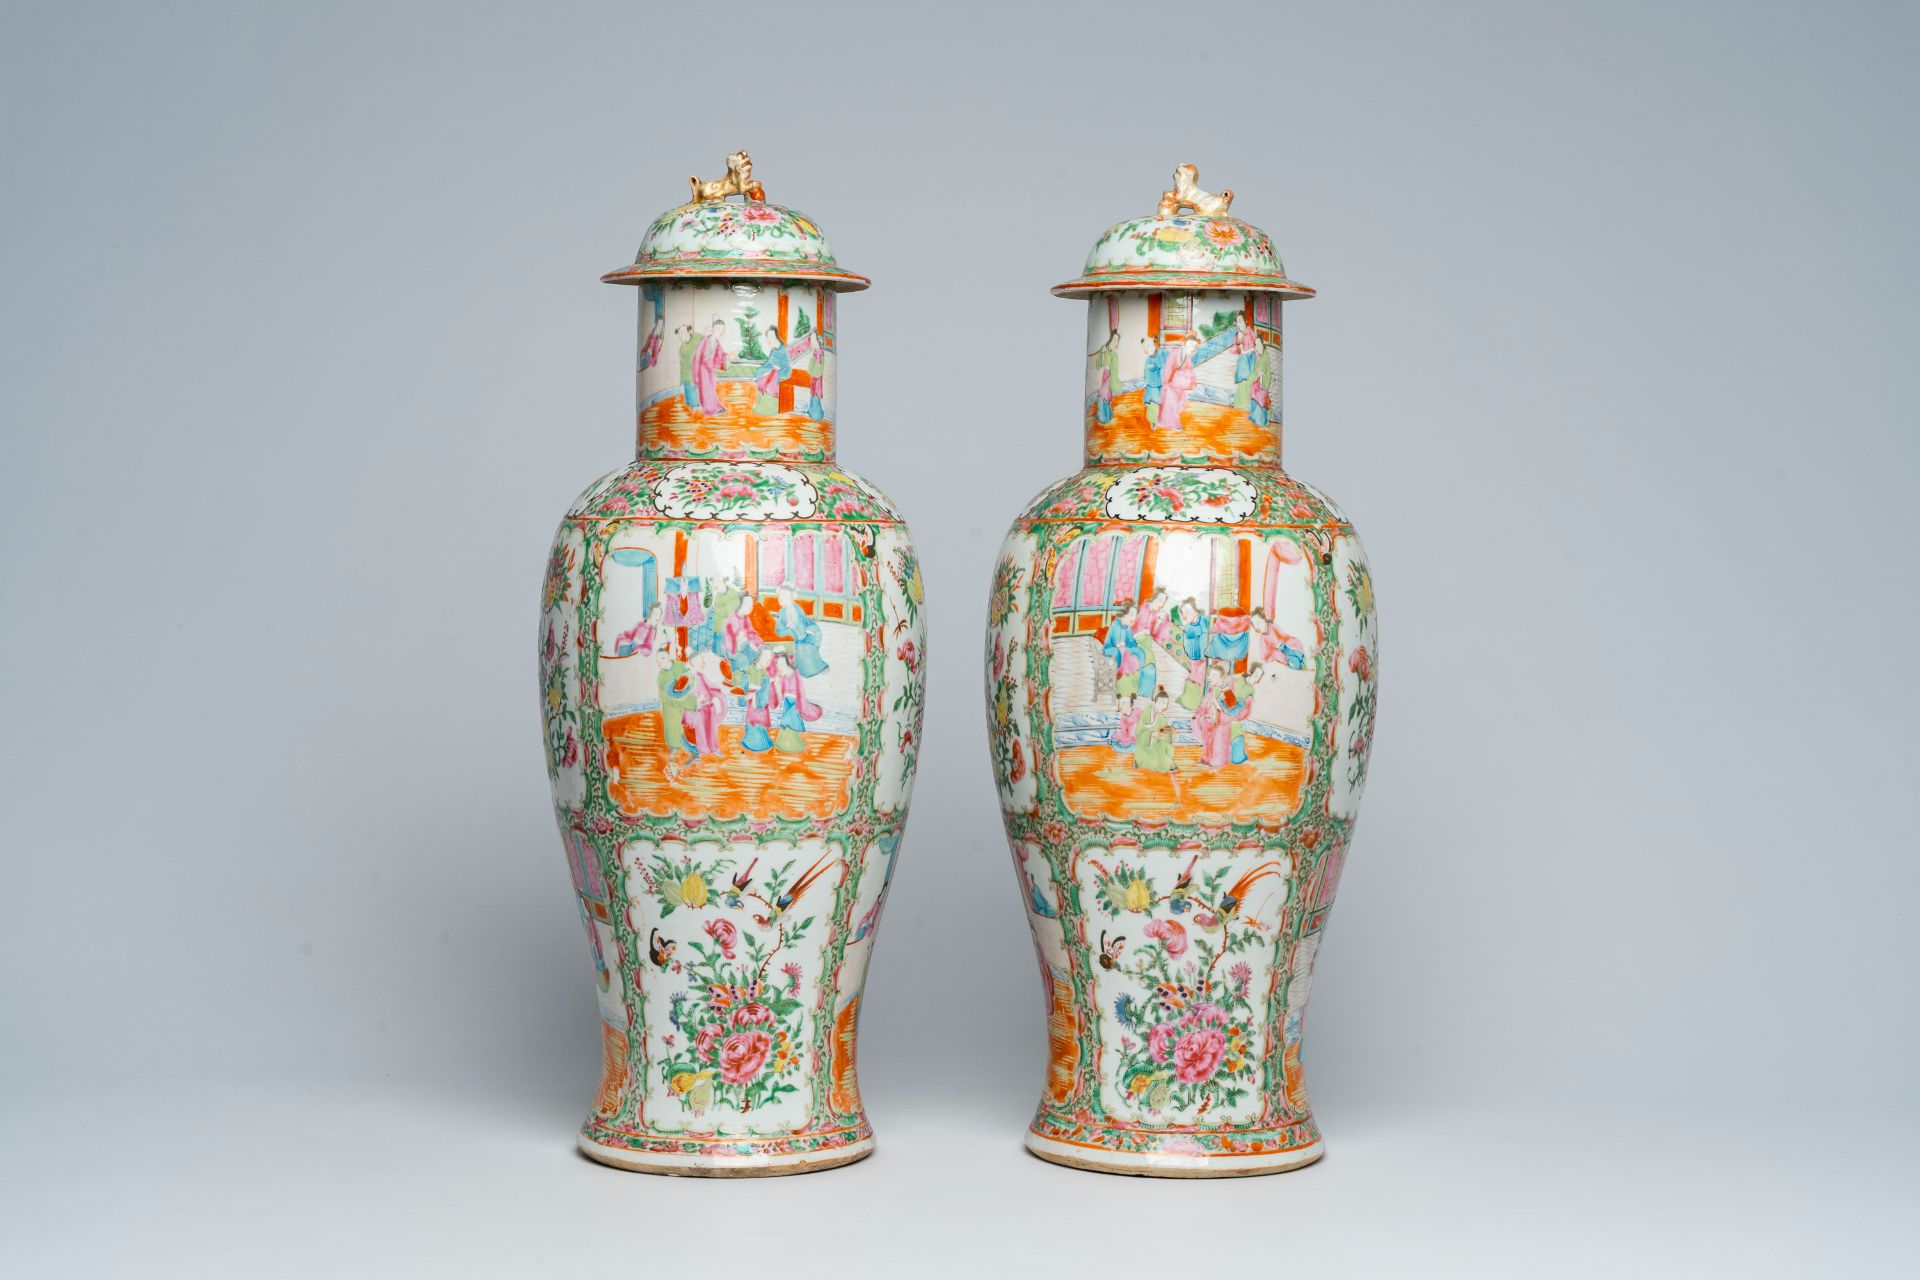 A pair of Chinese Canton famille rose vases and covers with palace scenes and floral design, 19th C. - Image 3 of 6